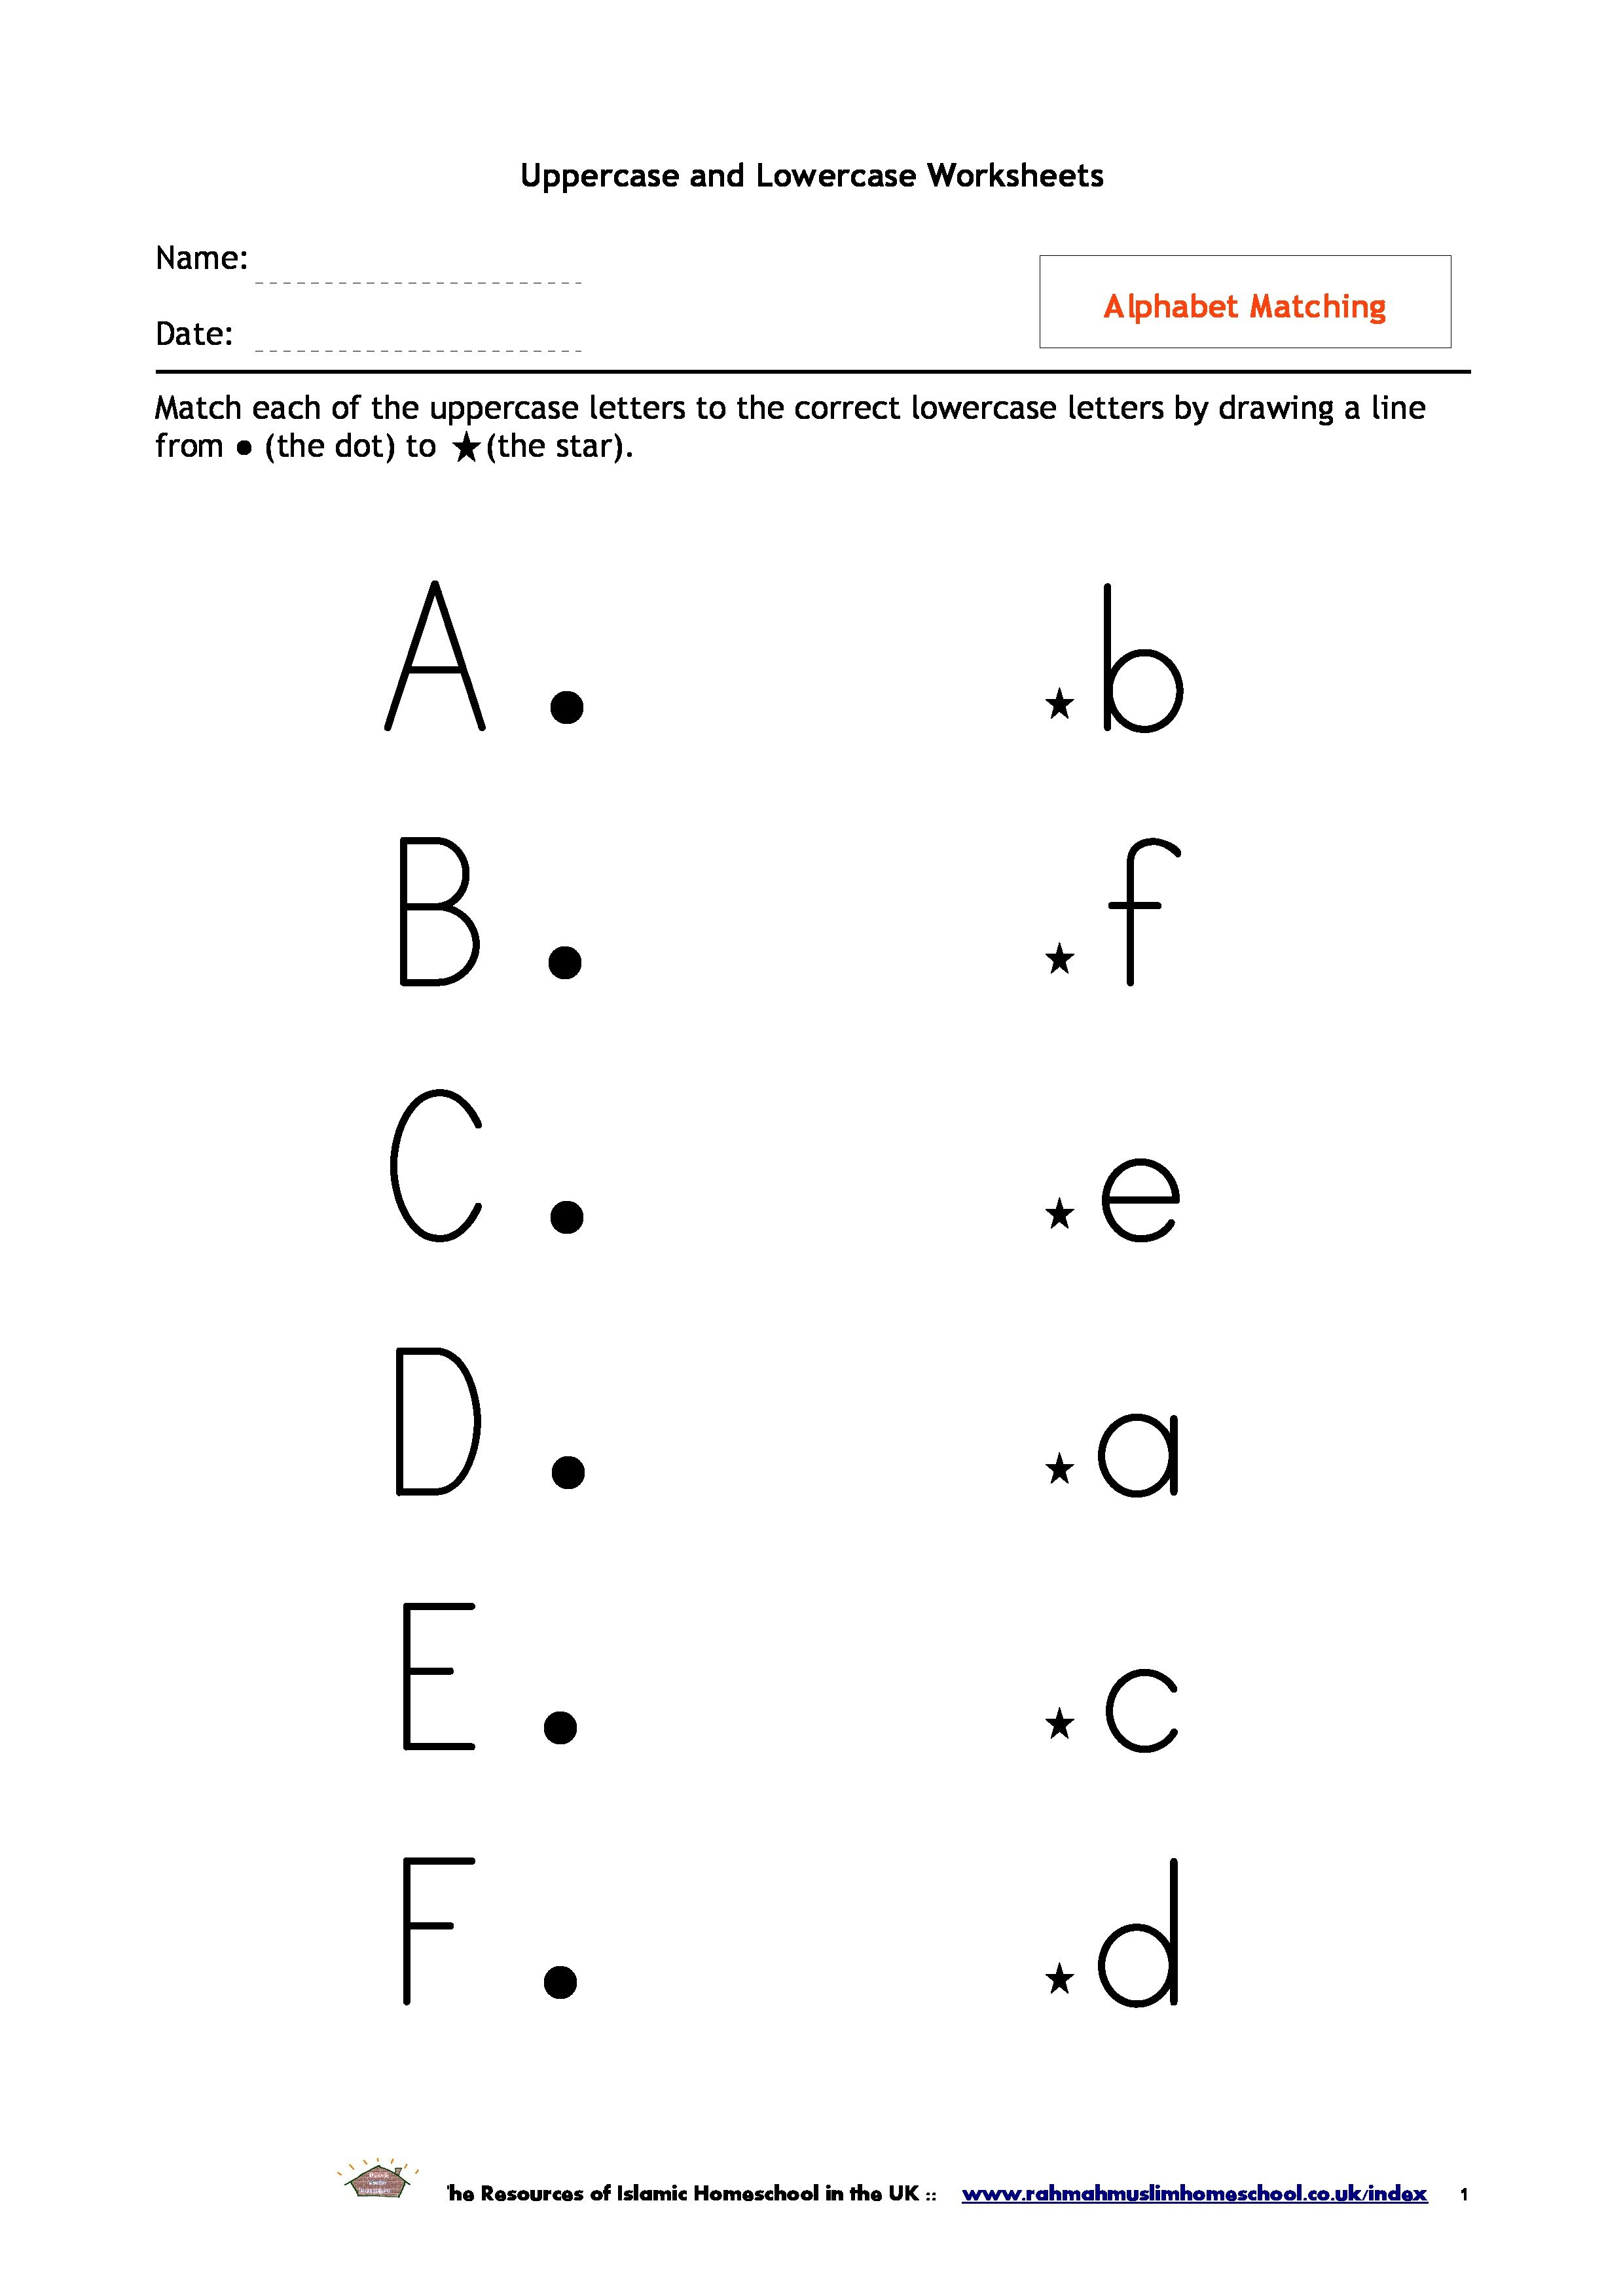 Alphabet Matching Worksheets  The Resources Of Islamic Homeschool For Alphabet Matching Worksheets